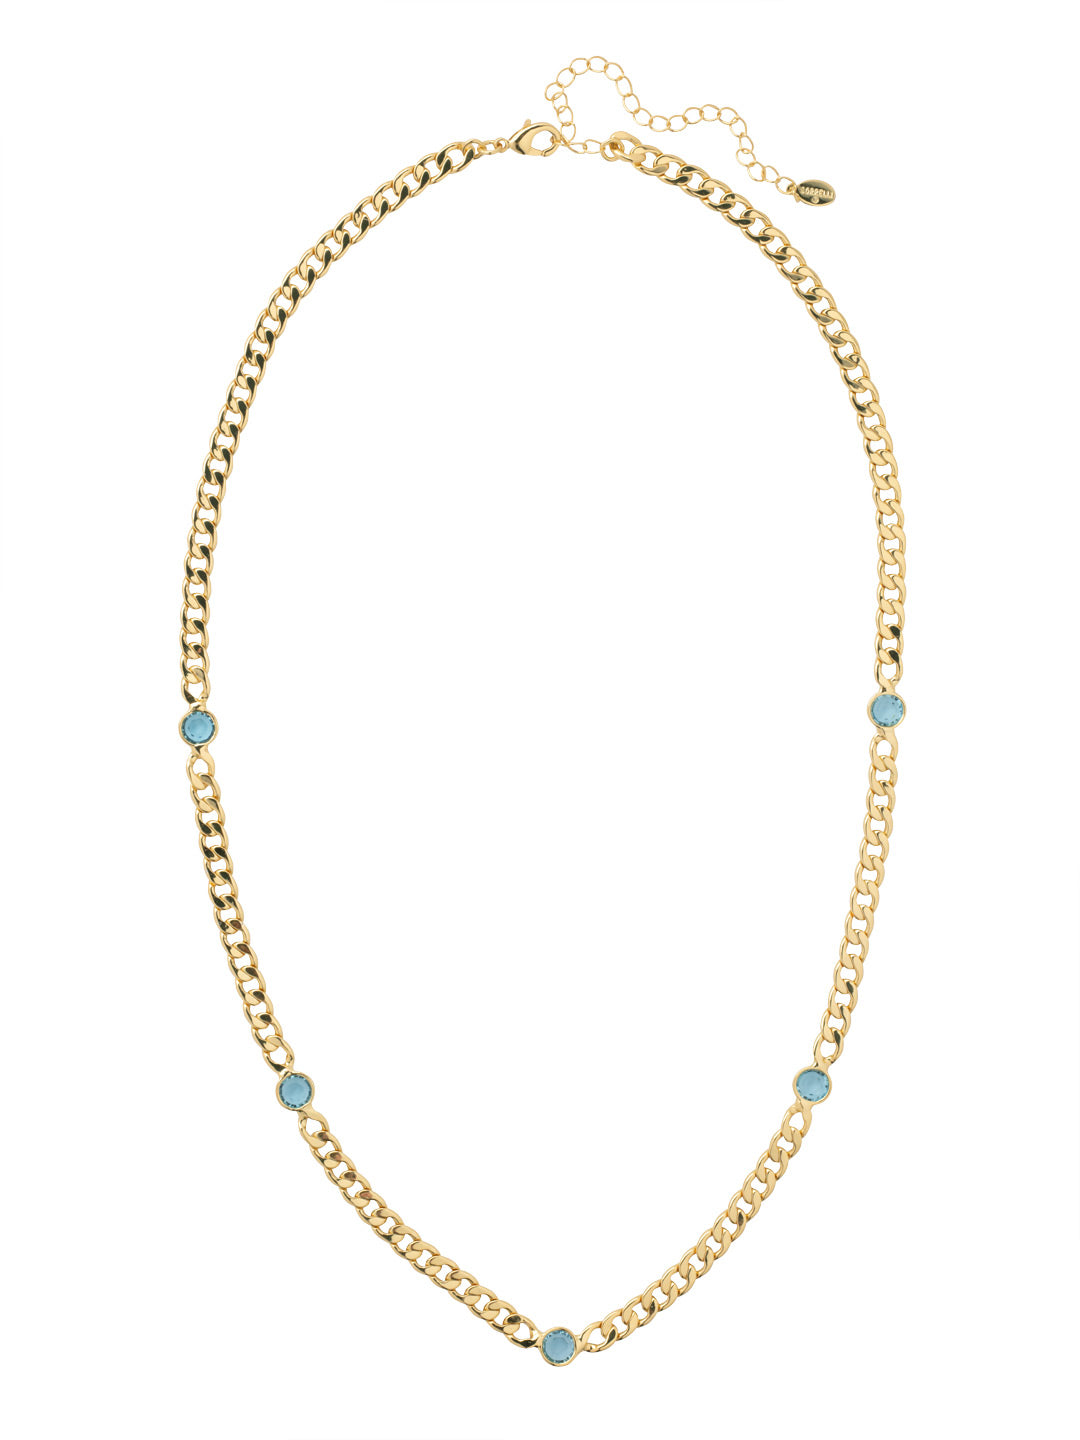 Dewdrop Long Necklace - NFK2BGAQU - <p>The Dewdrop Long Necklace features clear cut channels along an adjustable curb chain, secured with a lobster claw clasp. From Sorrelli's Aquamarine collection in our Bright Gold-tone finish.</p>